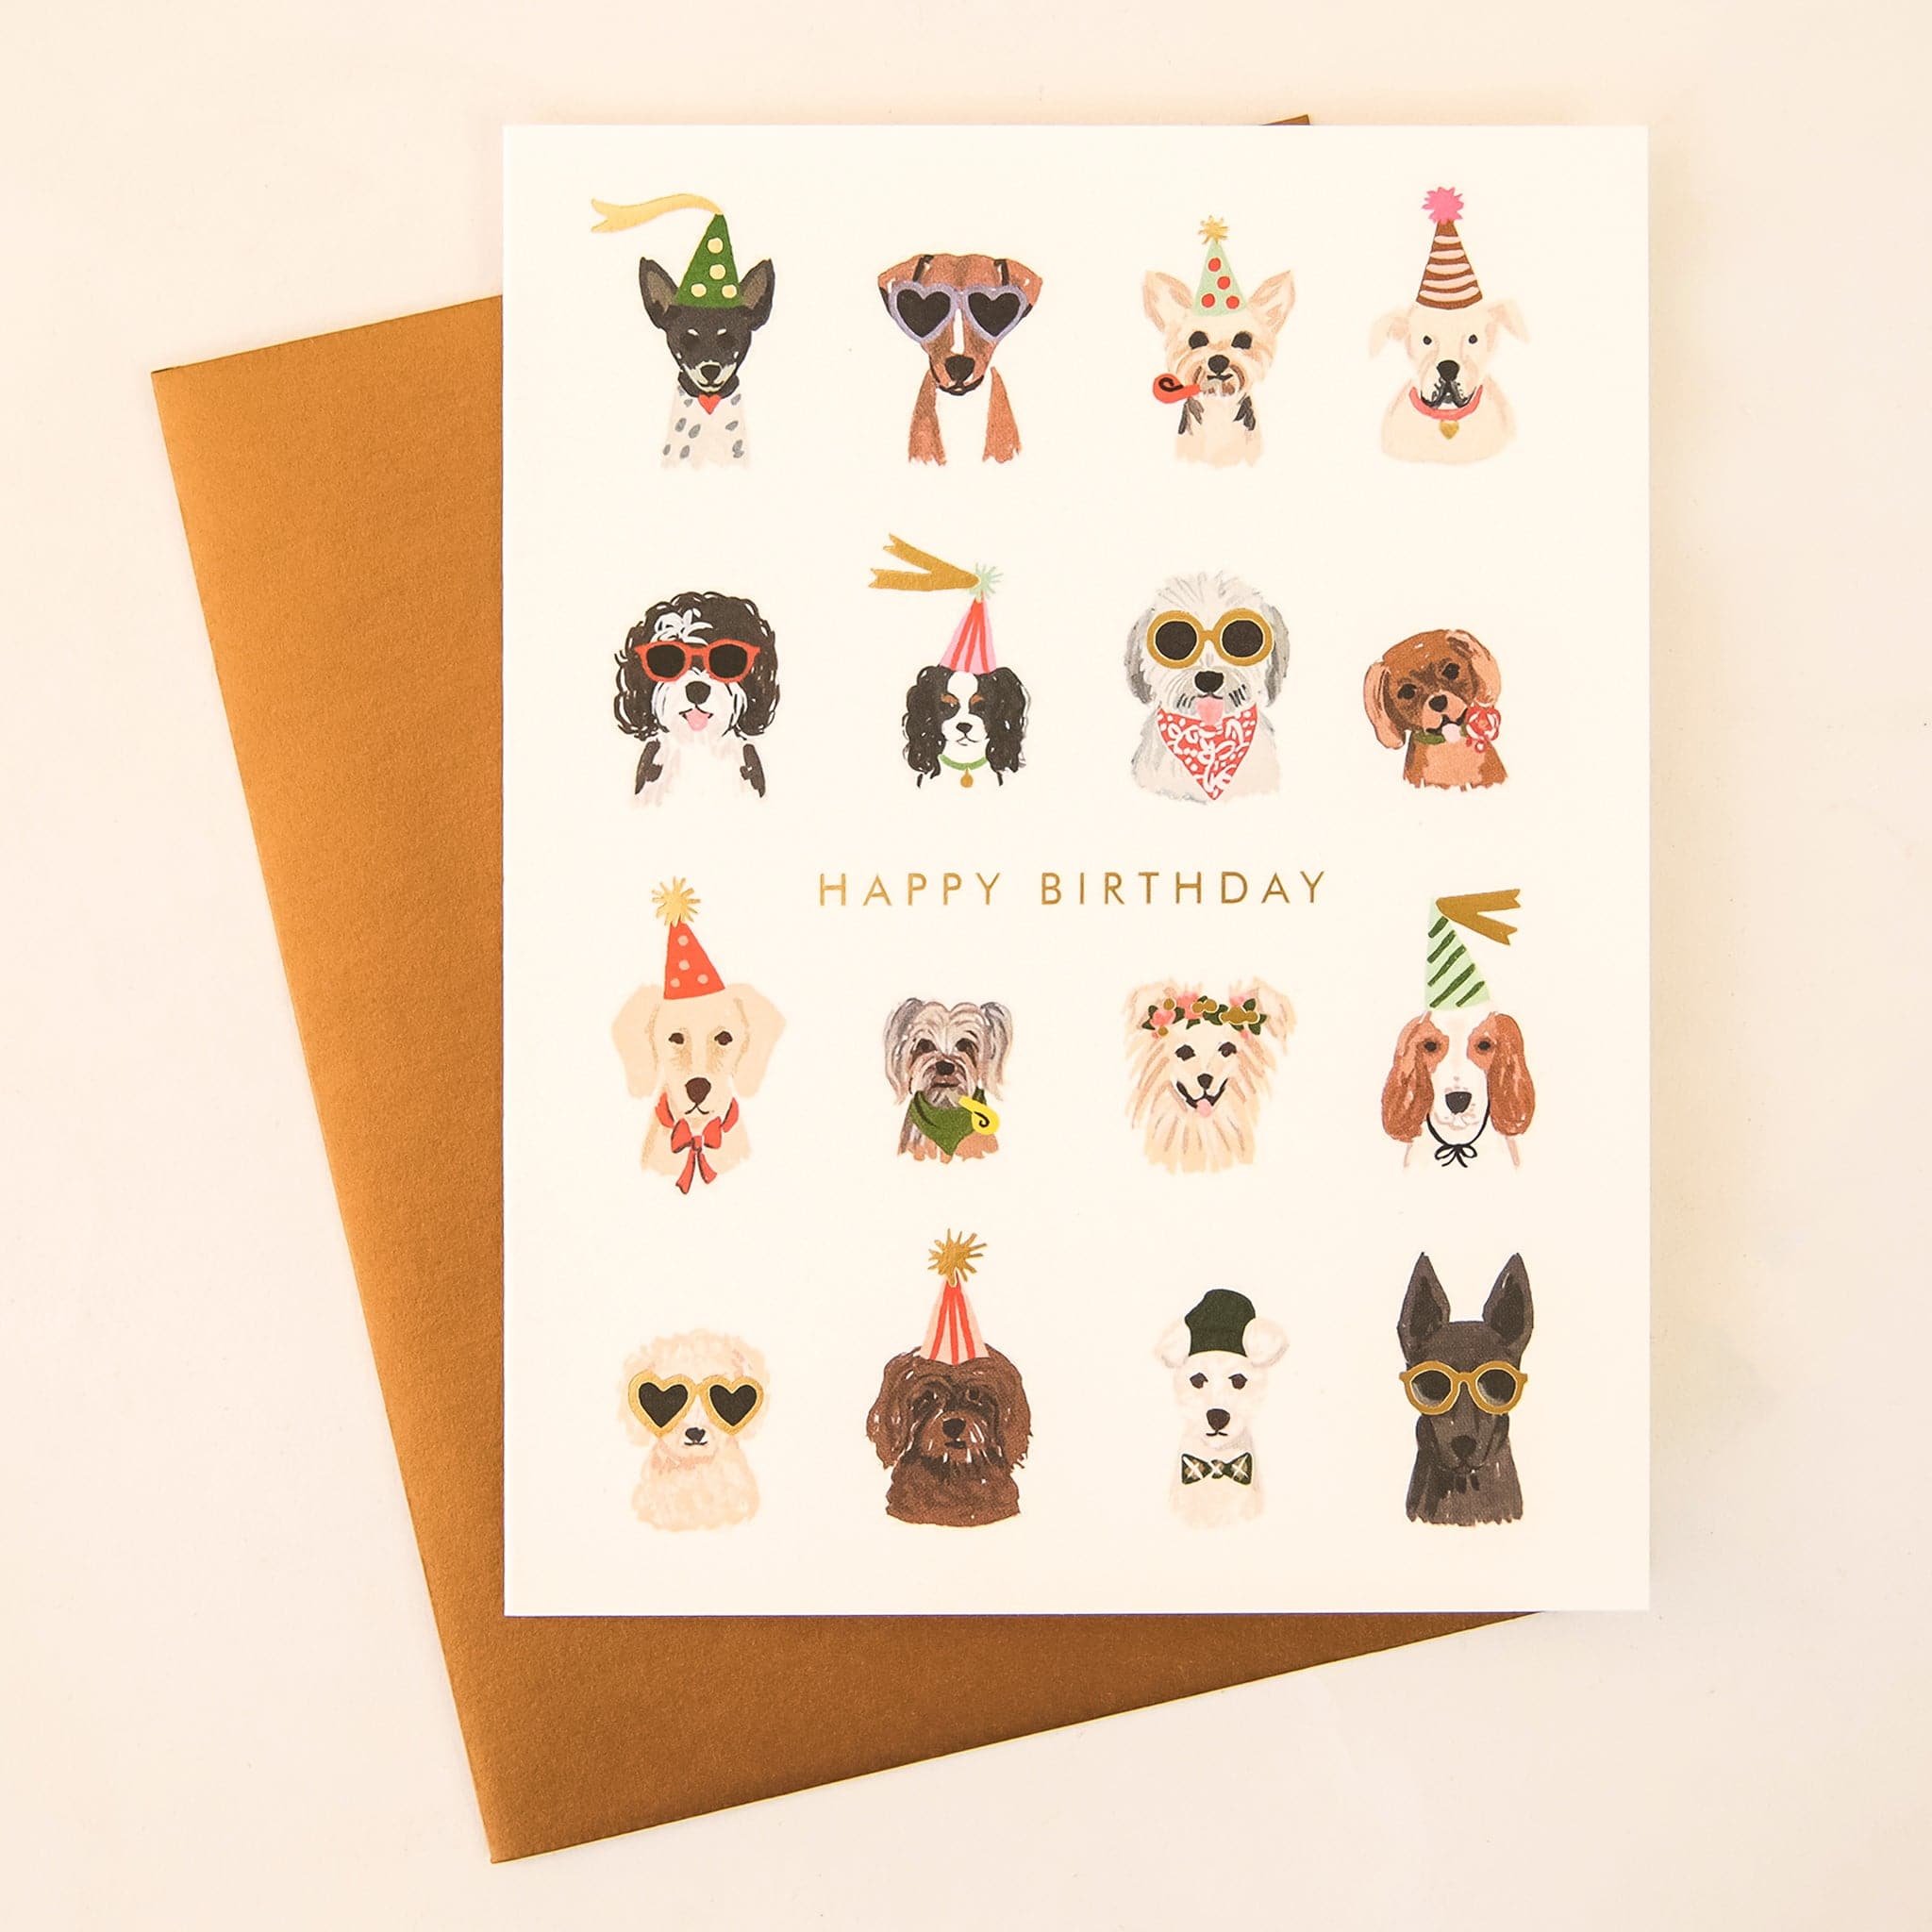 On a cream background is a gold envelope and a white card with various breeds of dogs in party attire and sunglasses as well as text in the center that reads, &quot;Happy Birthday&quot; in gold letters. 